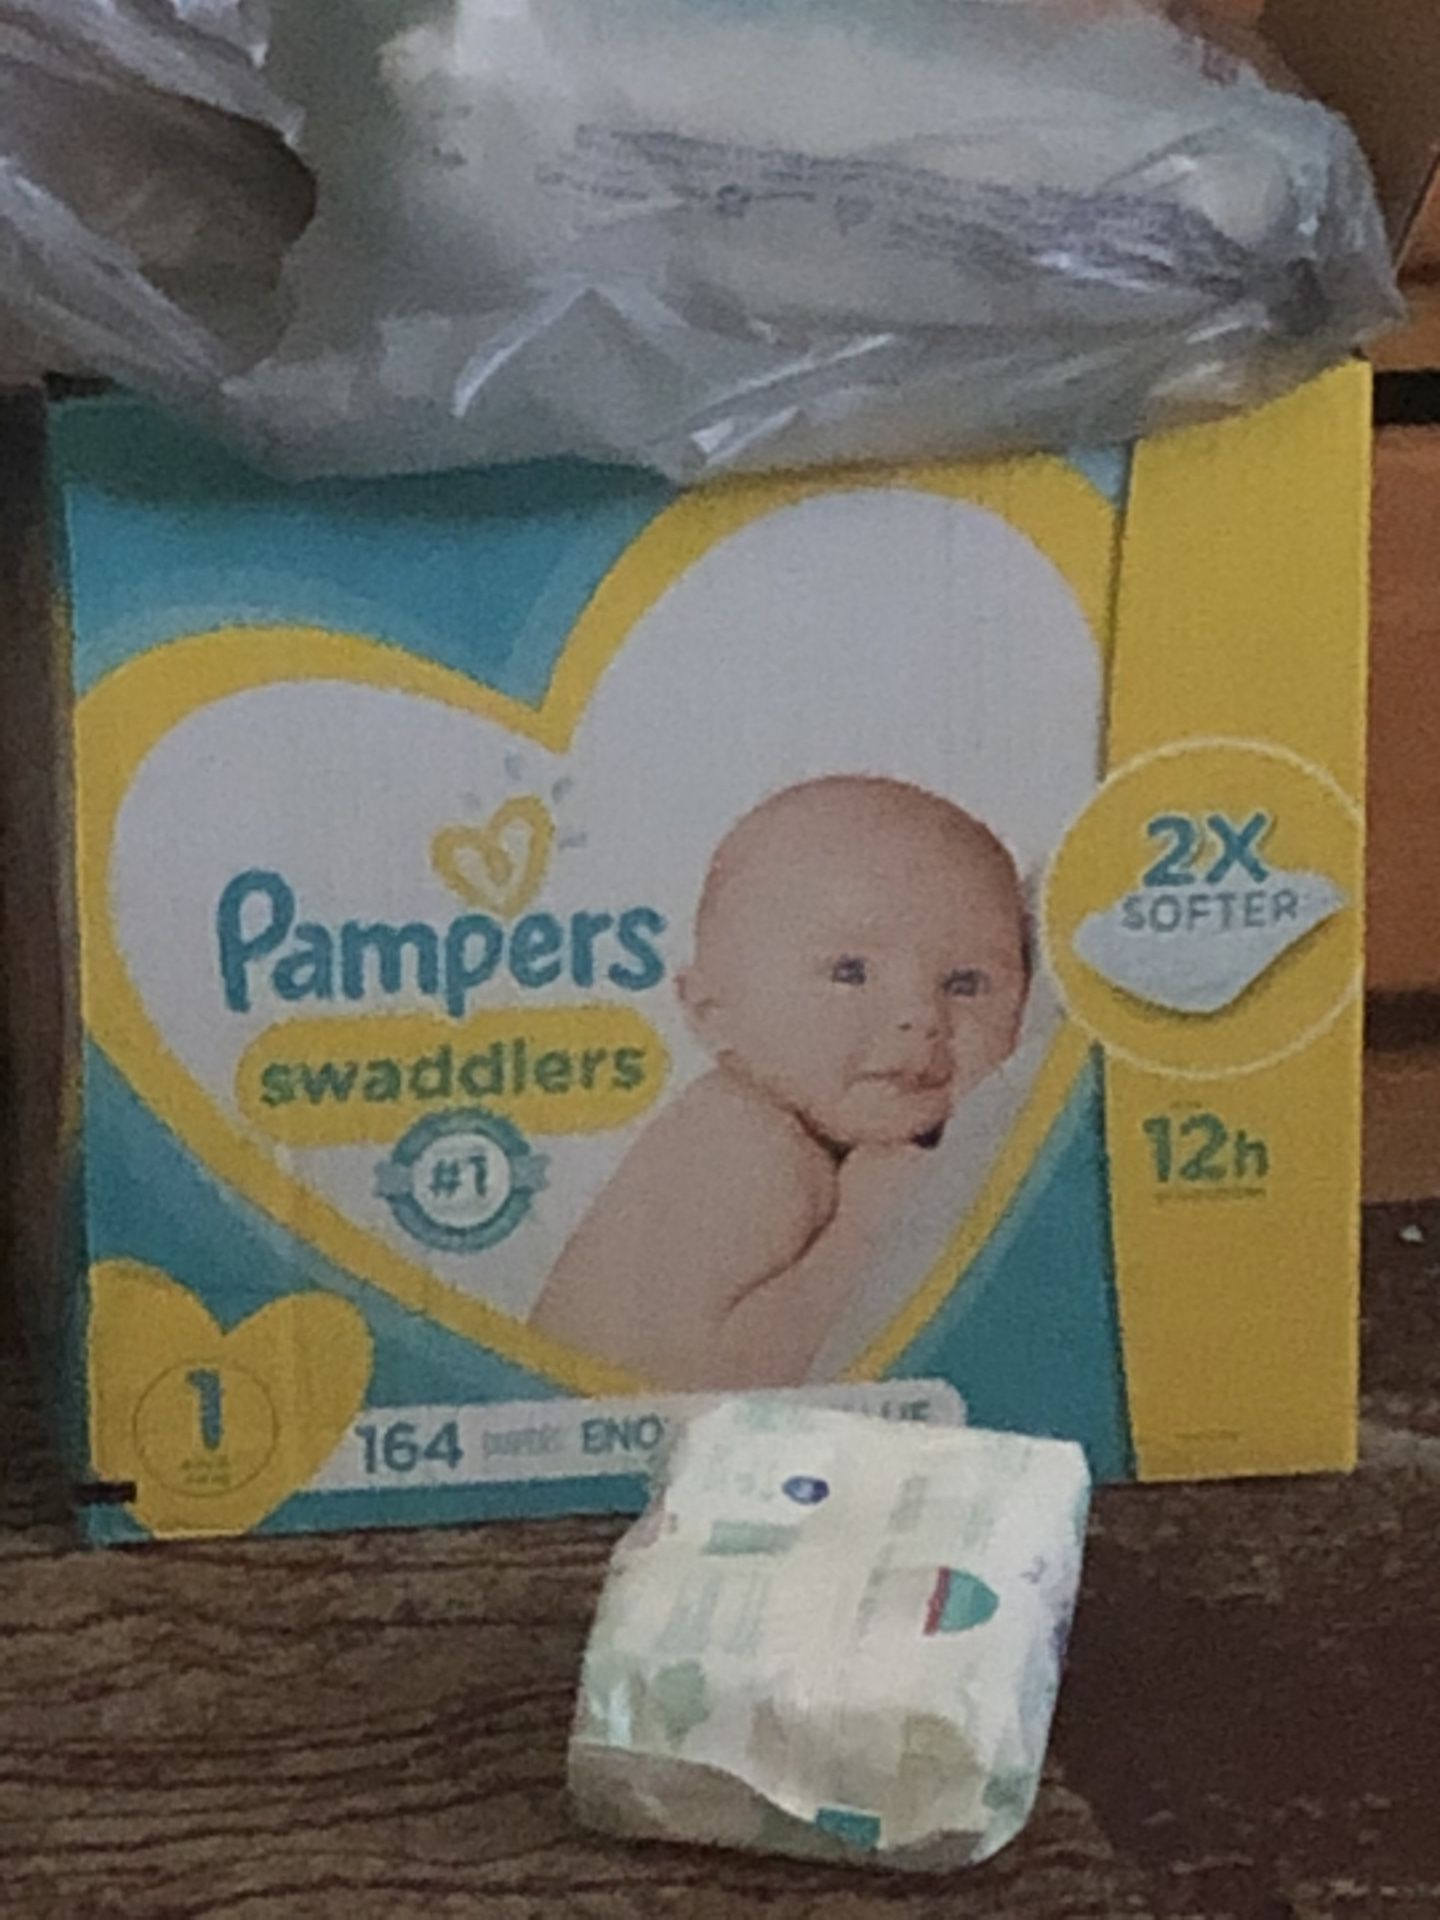 Pampers size 1 open box